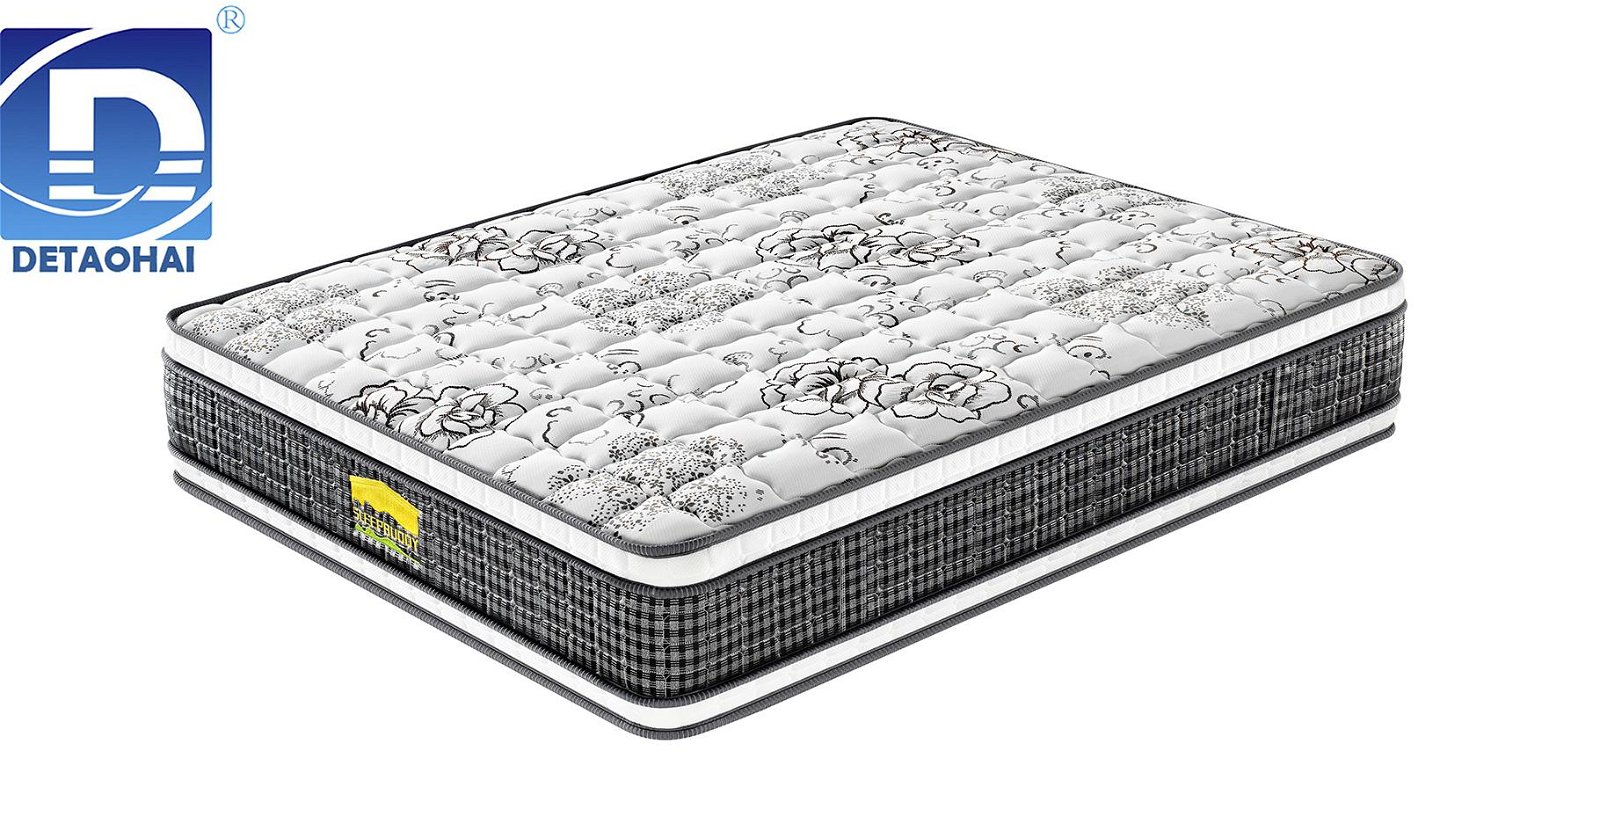 Double sided use pocket spring mattress with high quality